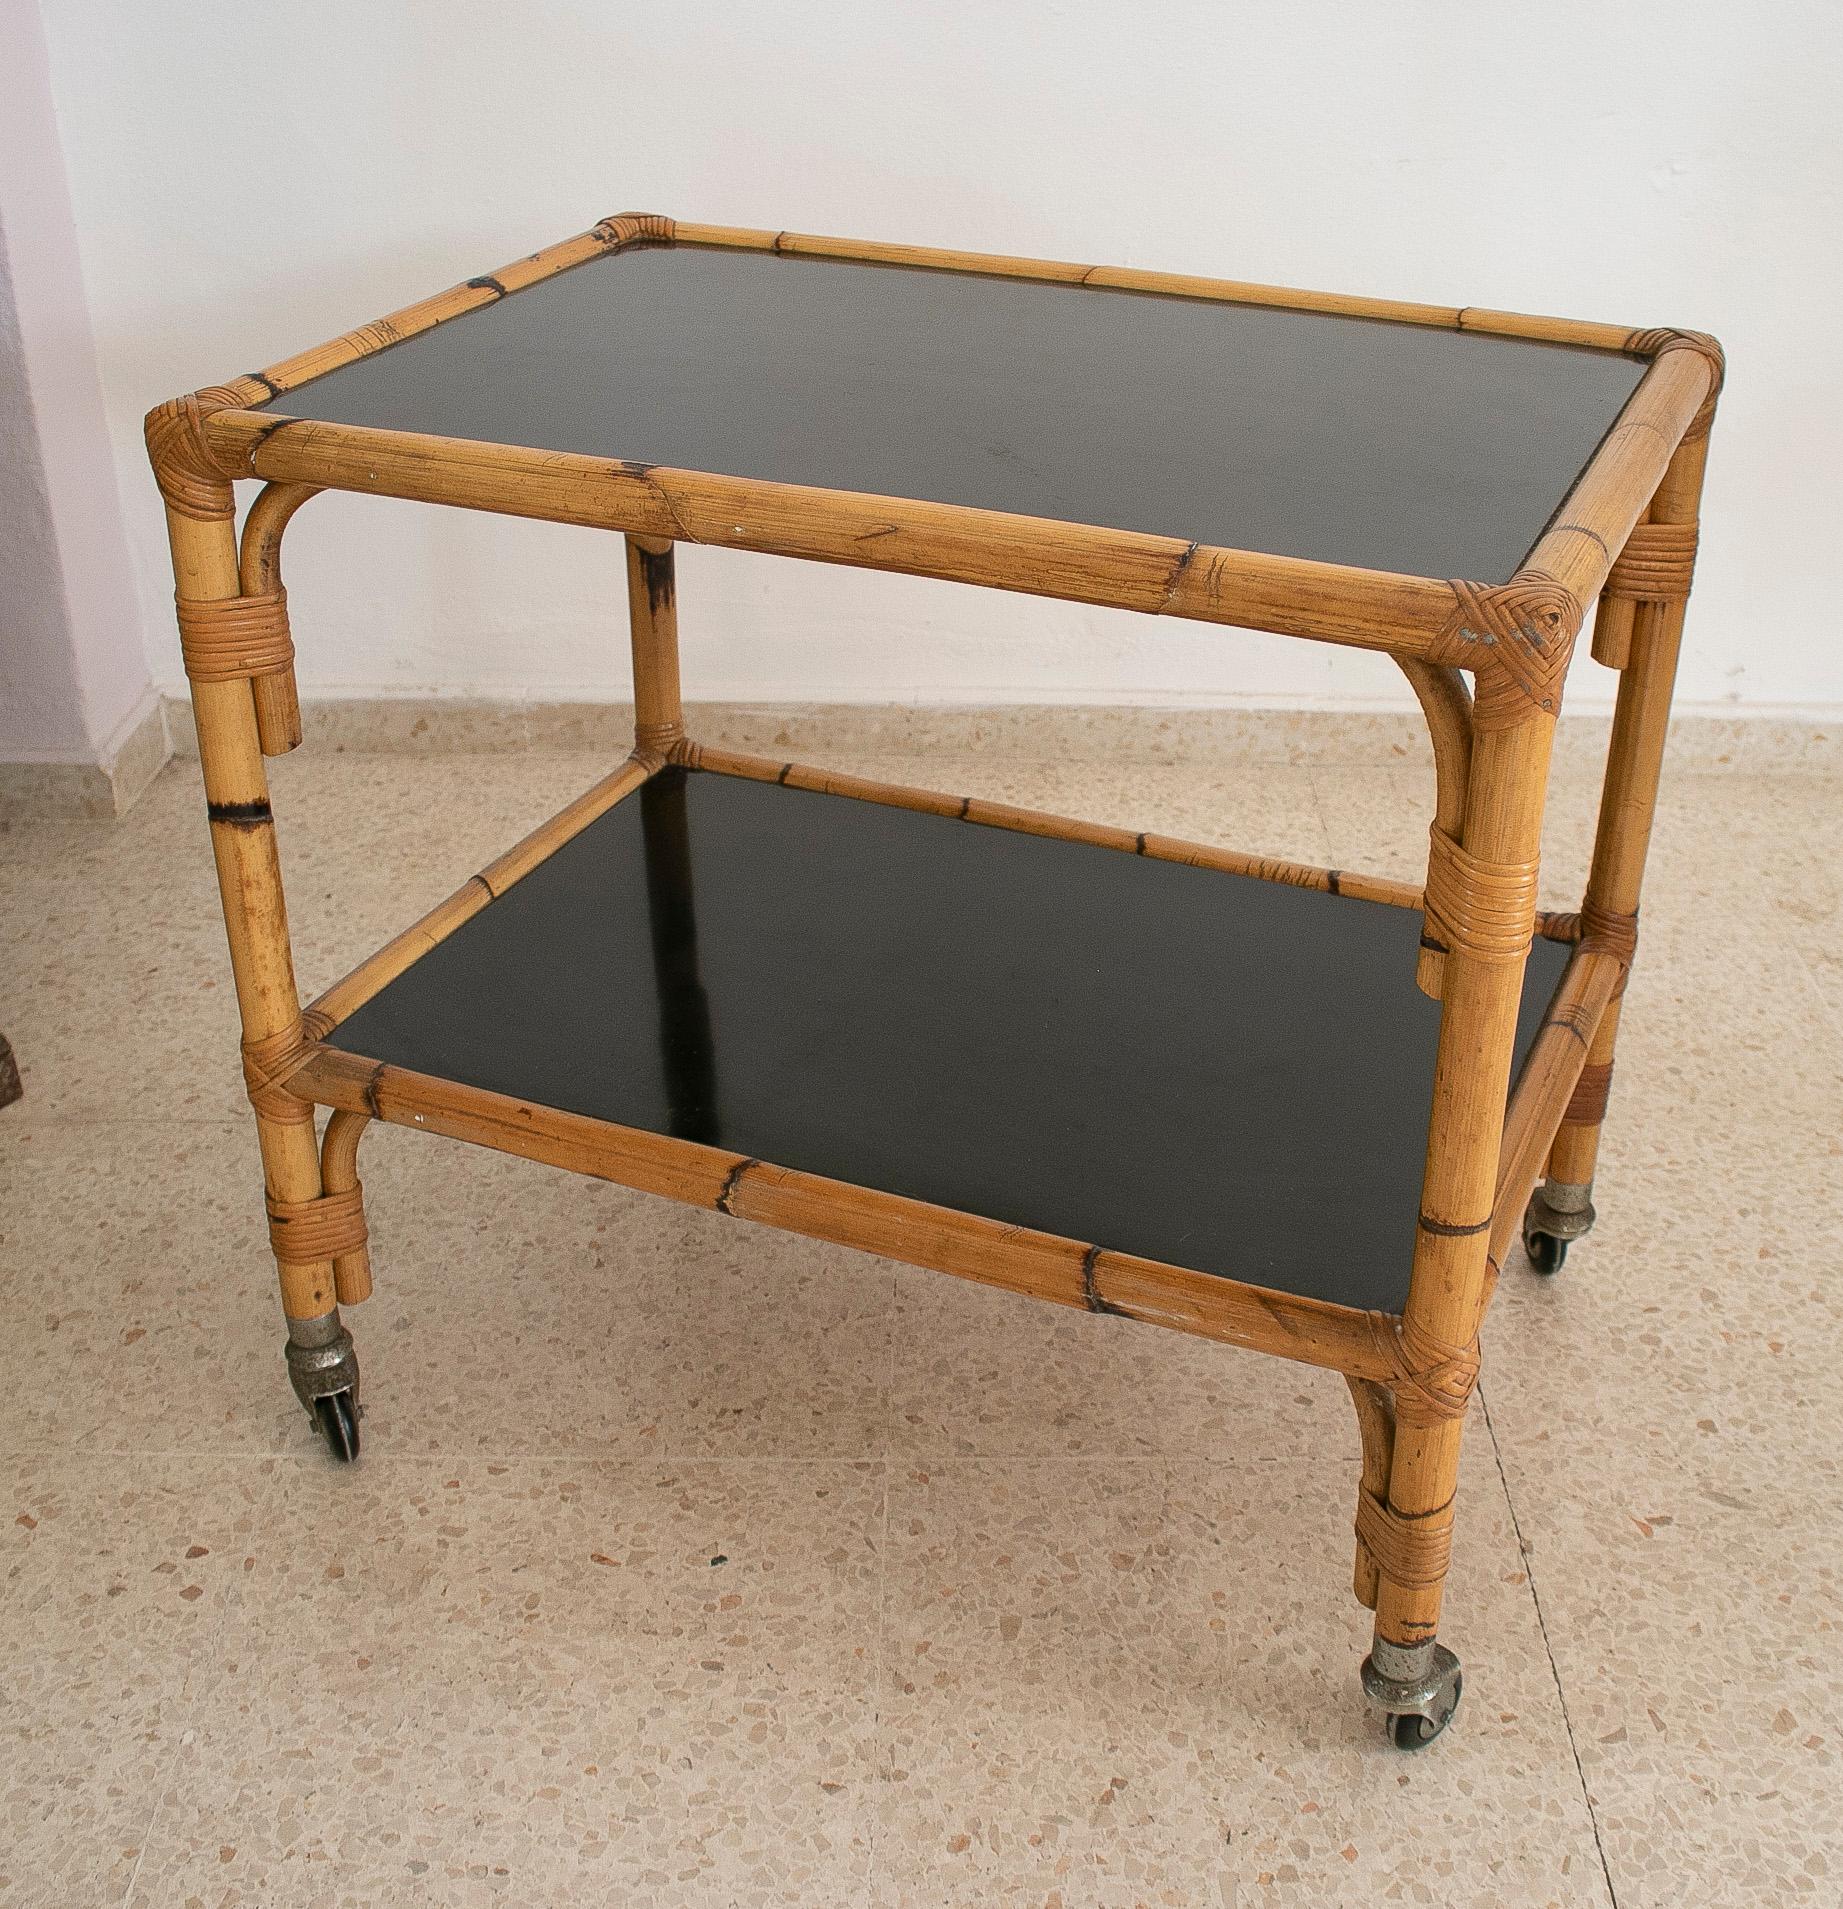 20th Century 1970s Spanish Bamboo 2-Shelves Trolley w/ Smoked Glass Panels For Sale